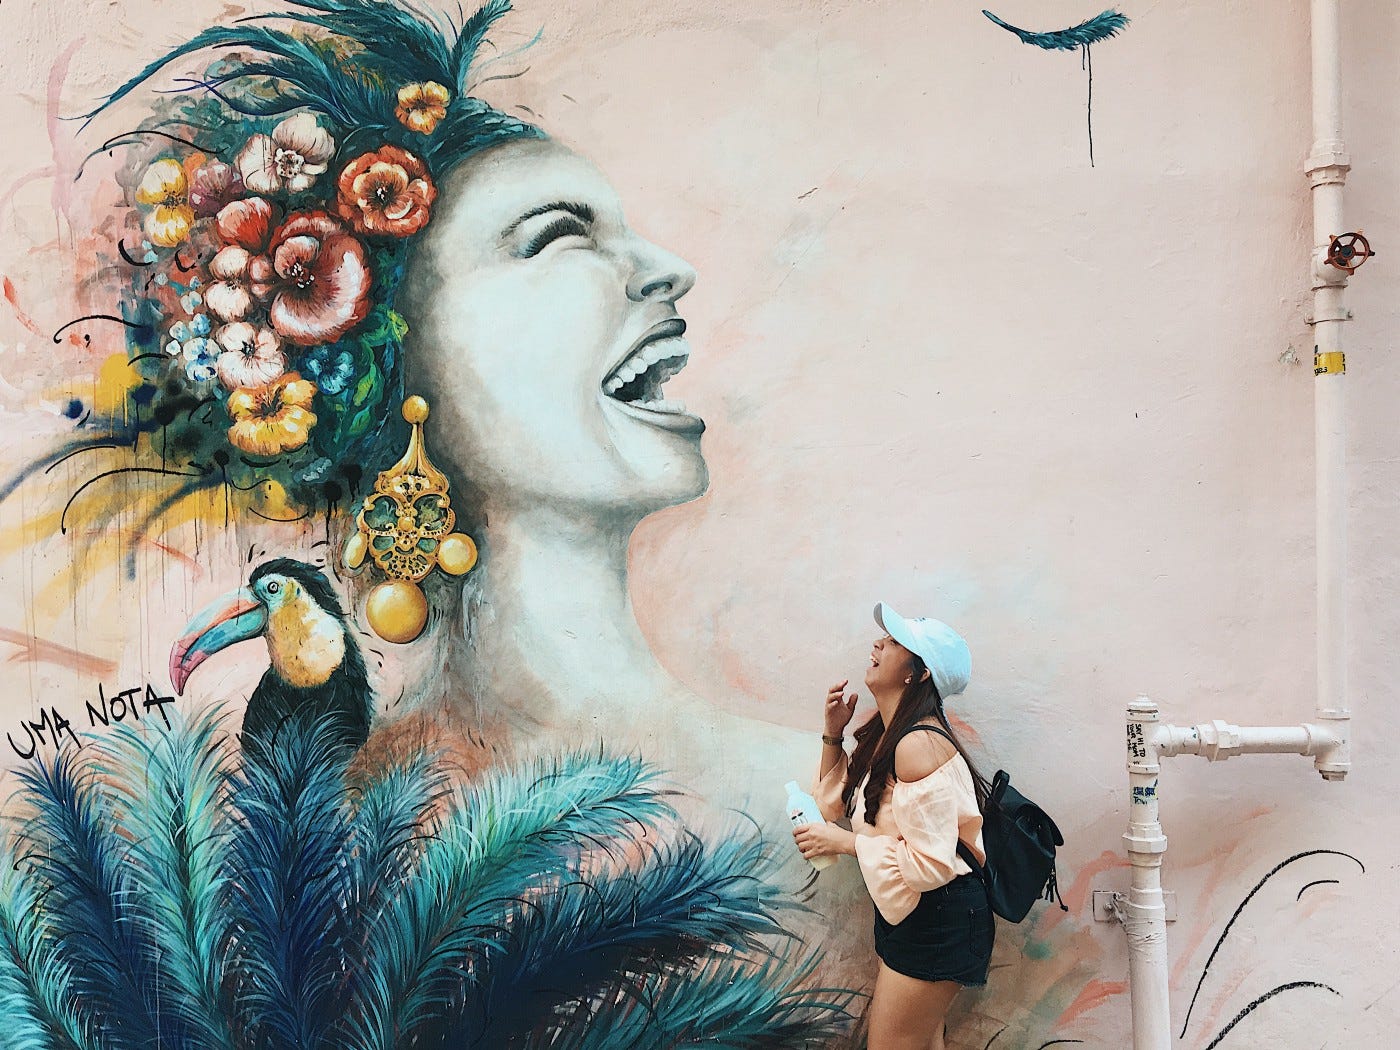 Woman laughing at a large mural of another woman laughing.